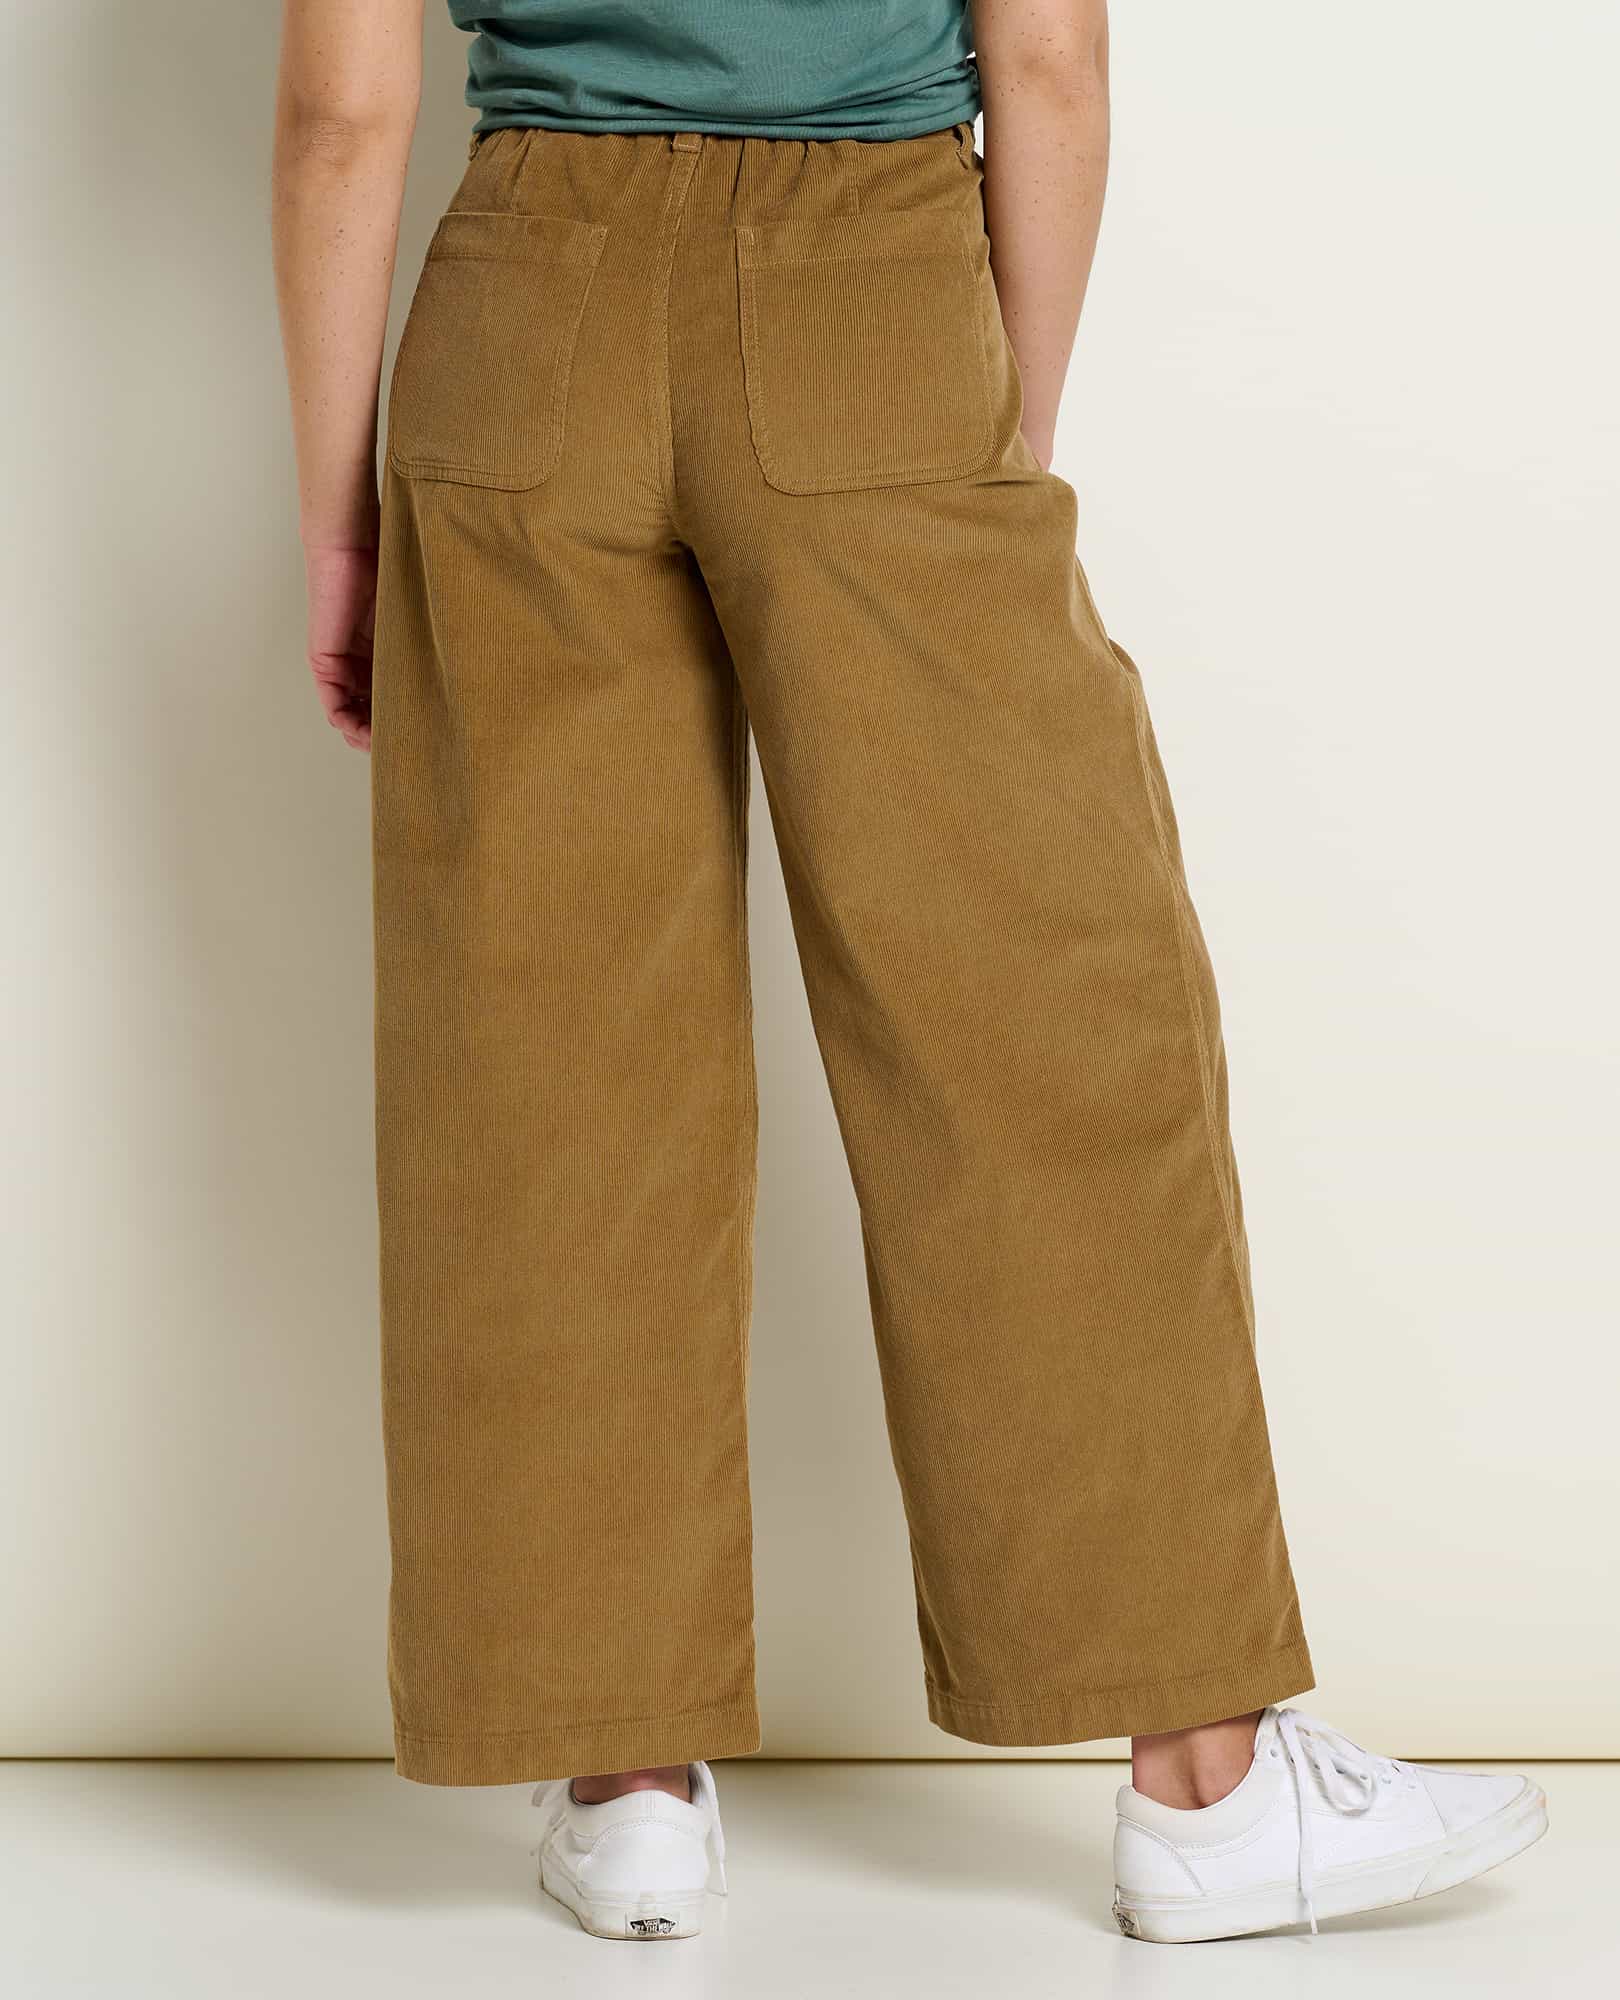 Scouter Cord Pleated Pull On Pant